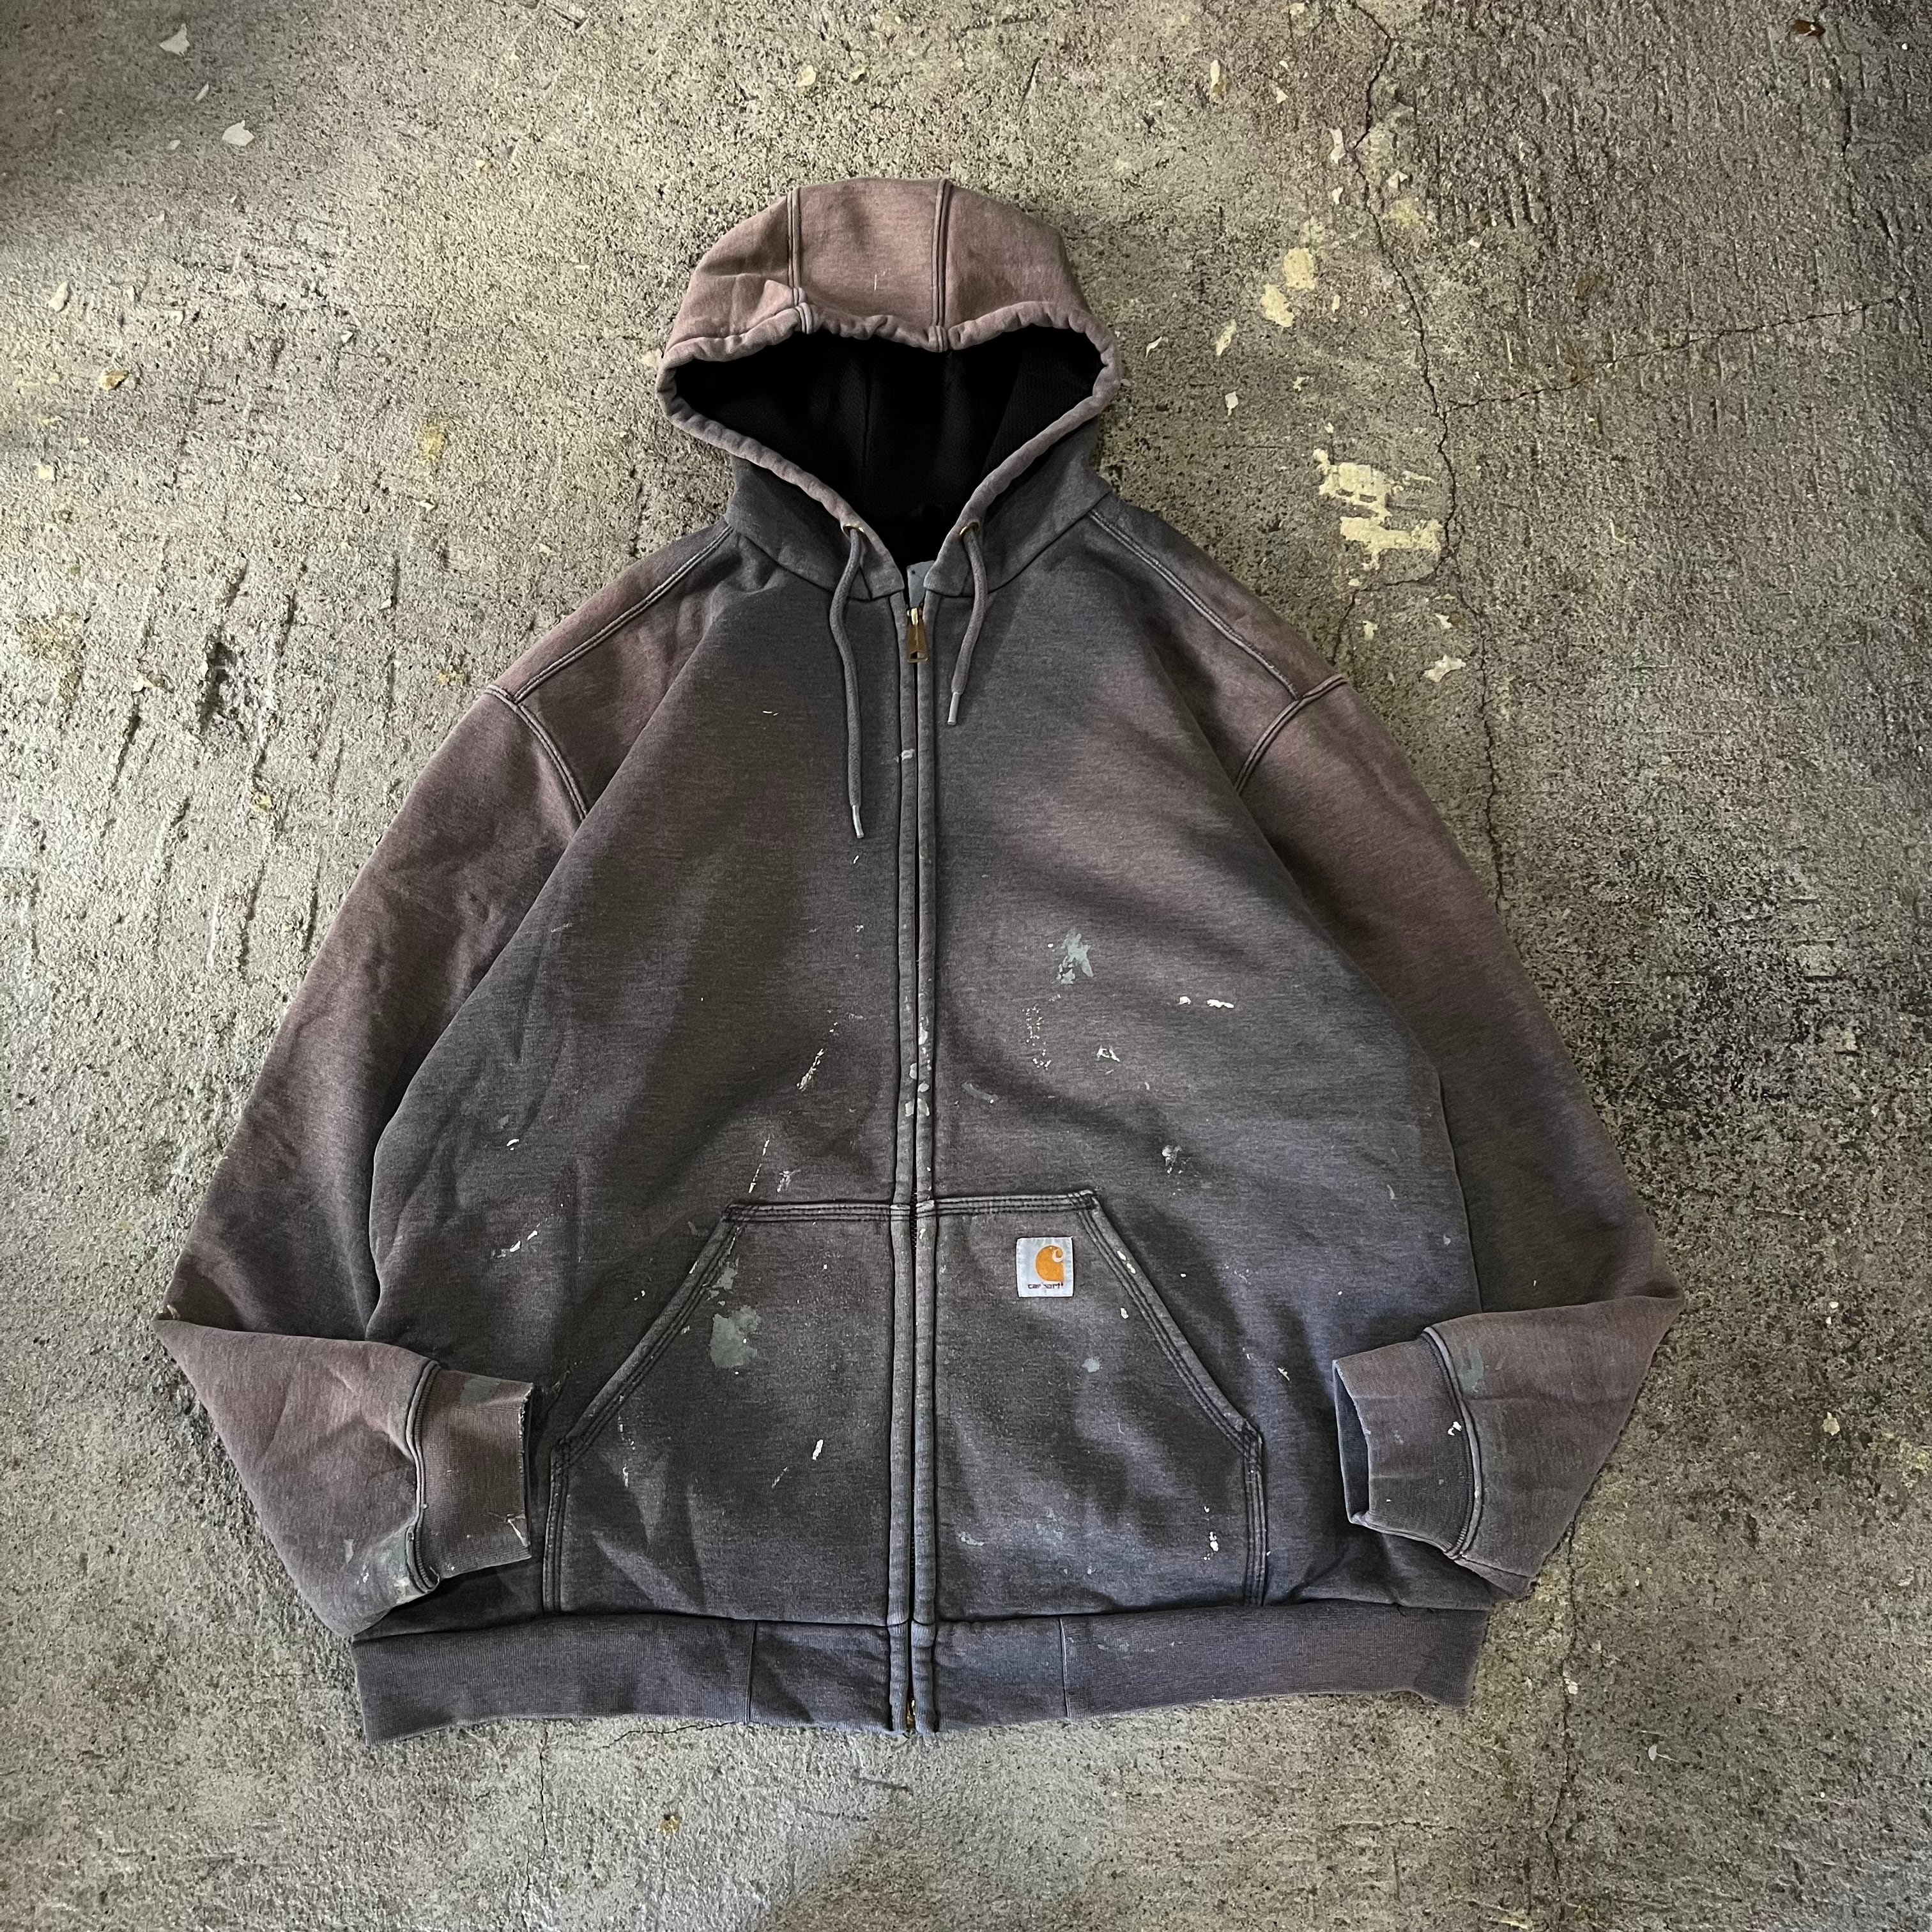 00s carhartt zip up parka | What’z up powered by BASE